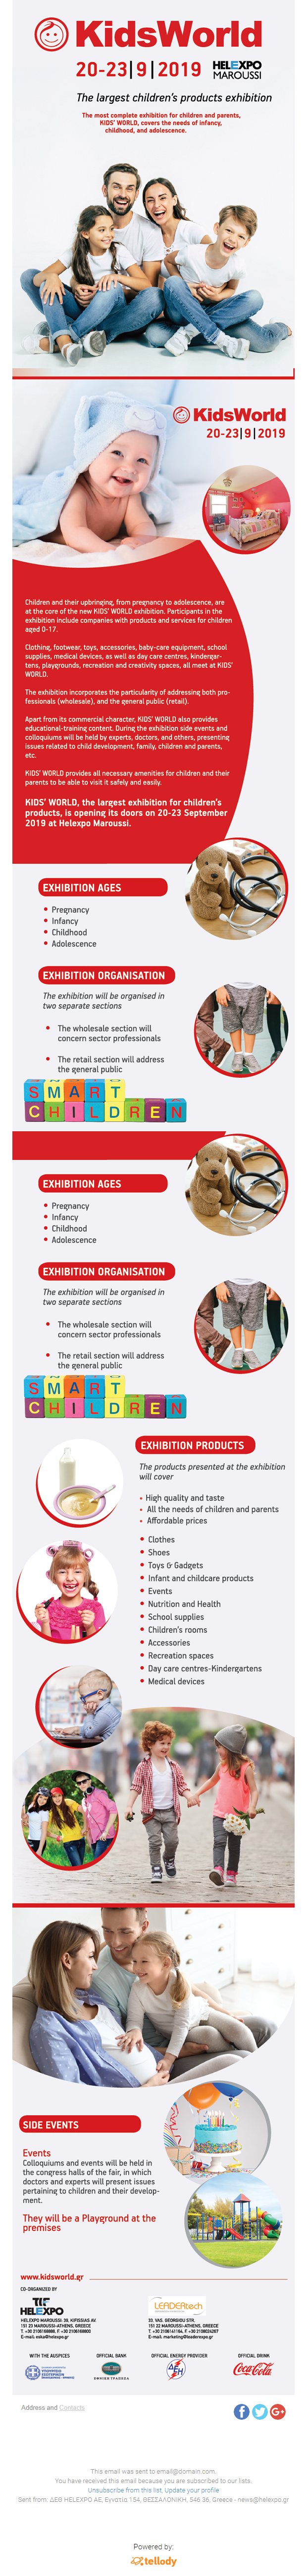 KidsWorld 2019 - The largest children's products exhibition